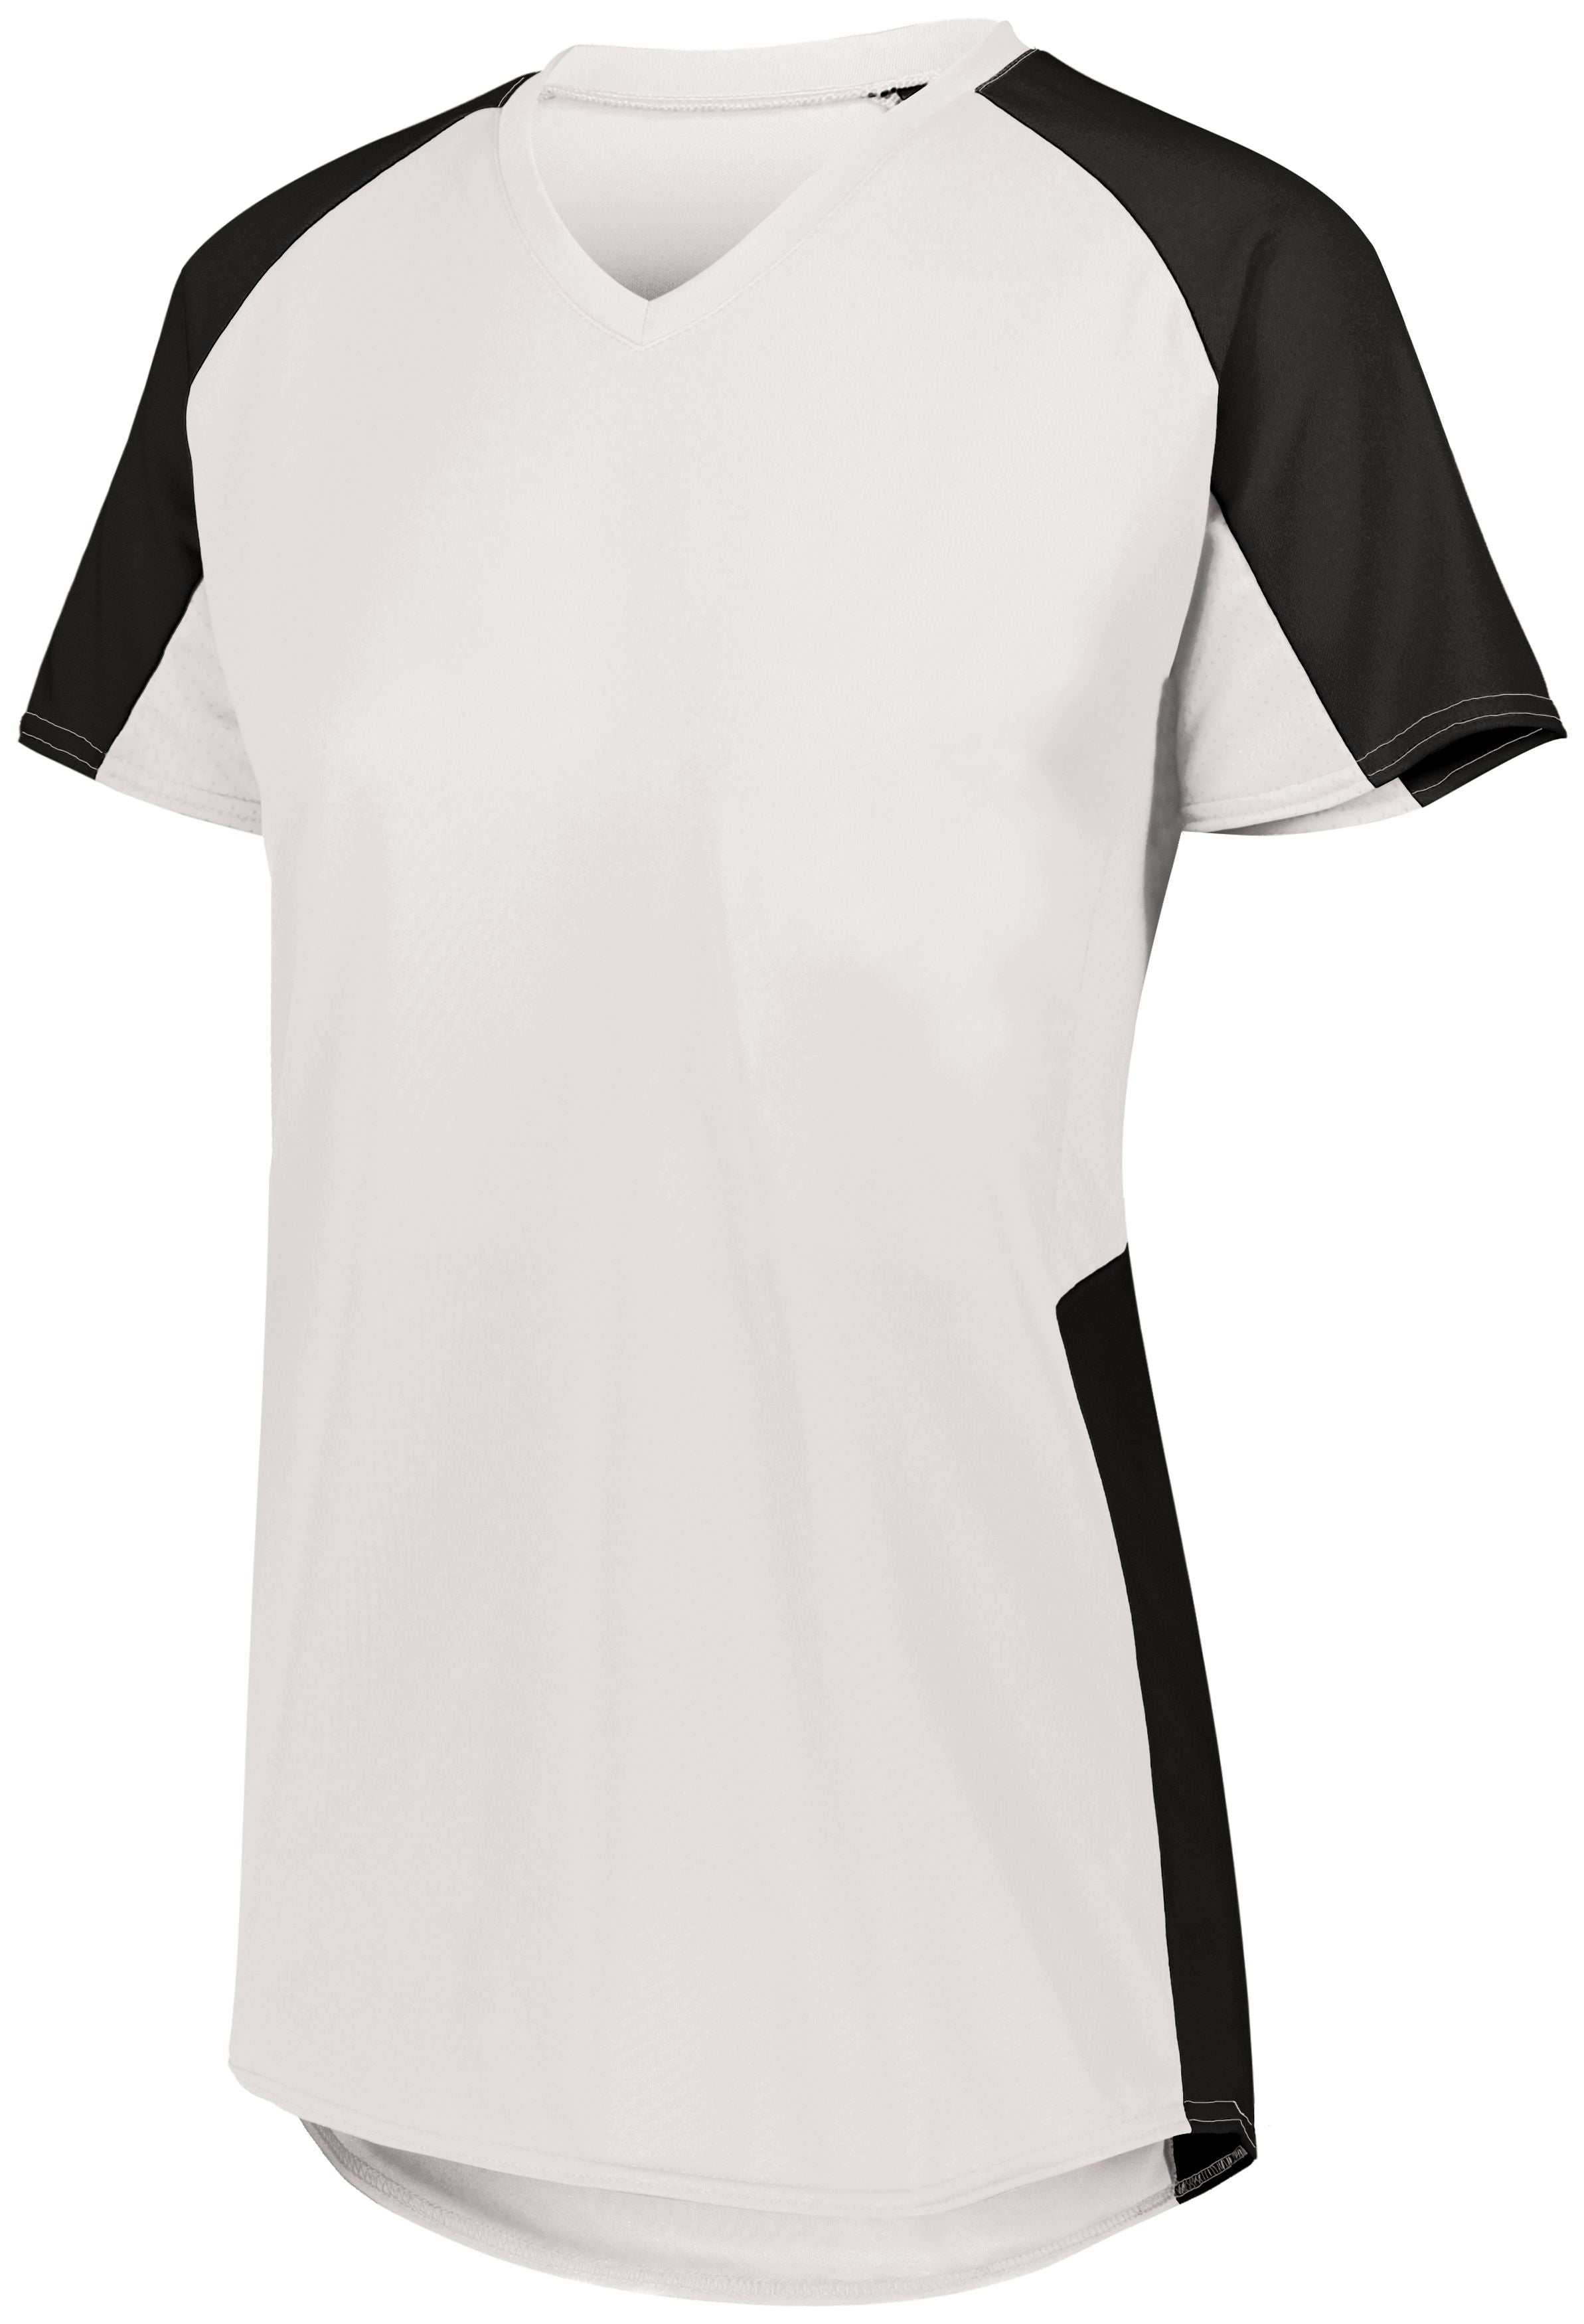 Augusta Sportswear Ladies Cutter Jersey in White/Black  -Part of the Ladies, Ladies-Jersey, Augusta-Products, Softball, Shirts product lines at KanaleyCreations.com